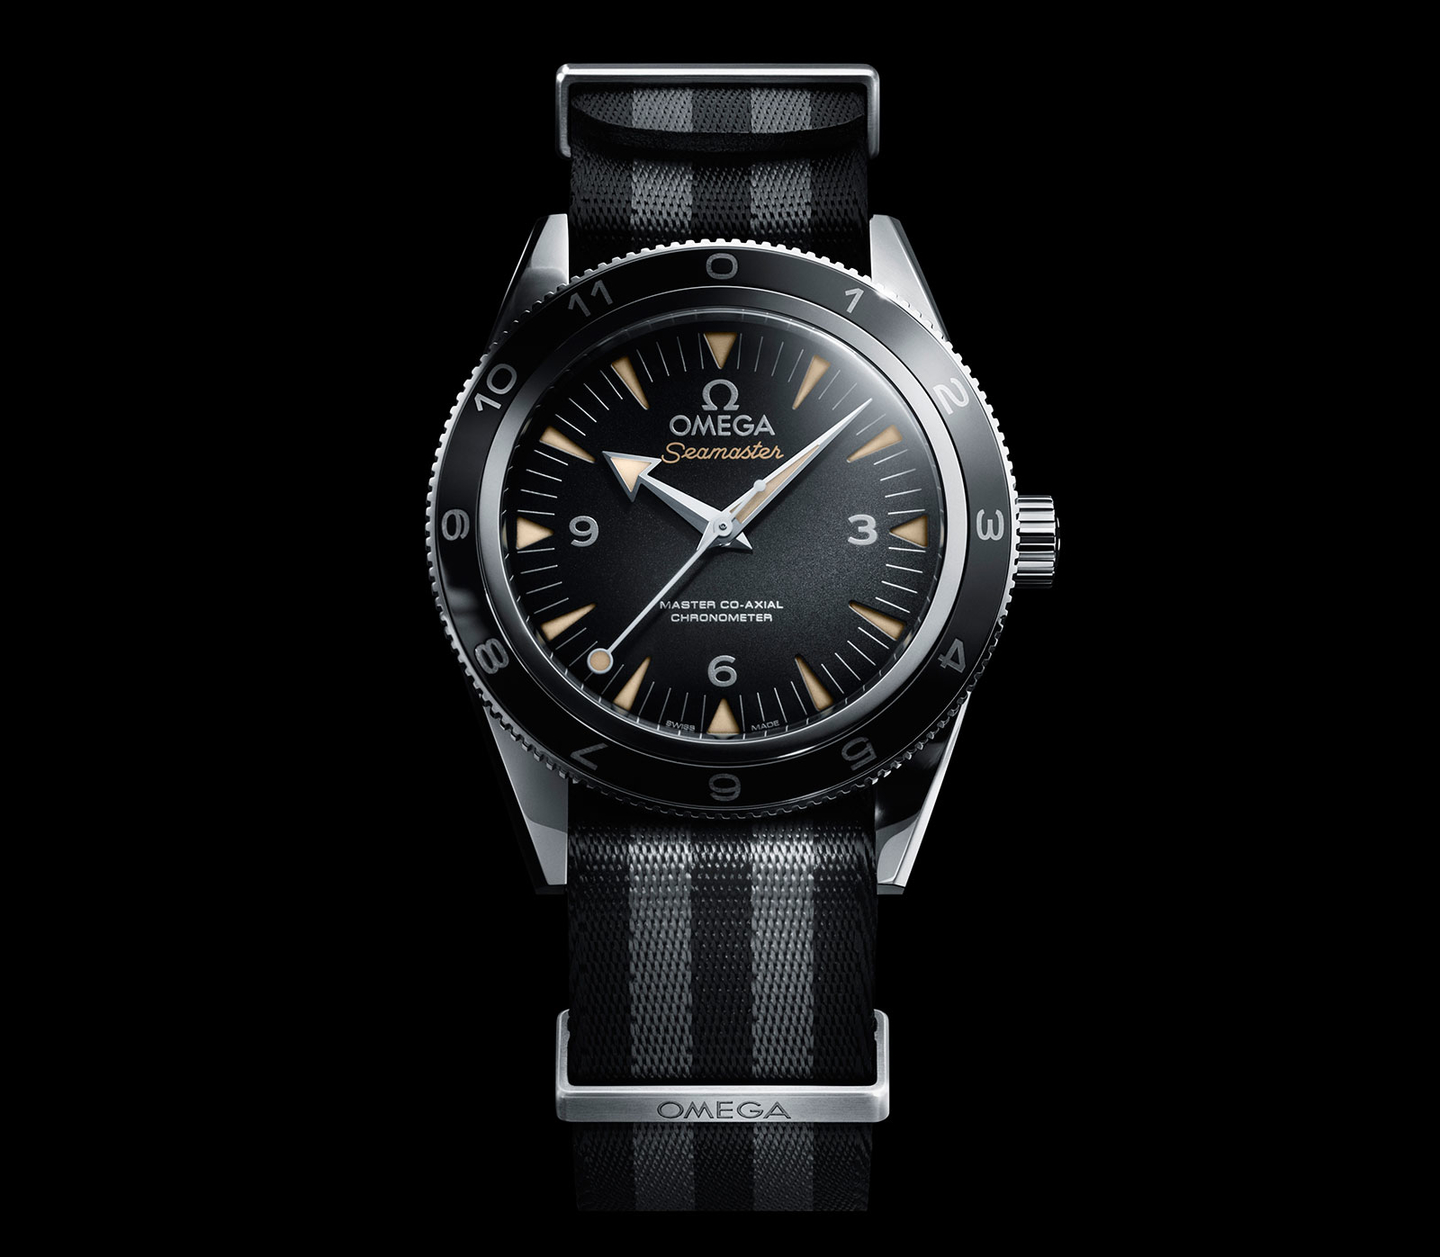 Introducing the Omega Seamaster 300 “Spectre” Limited Edition